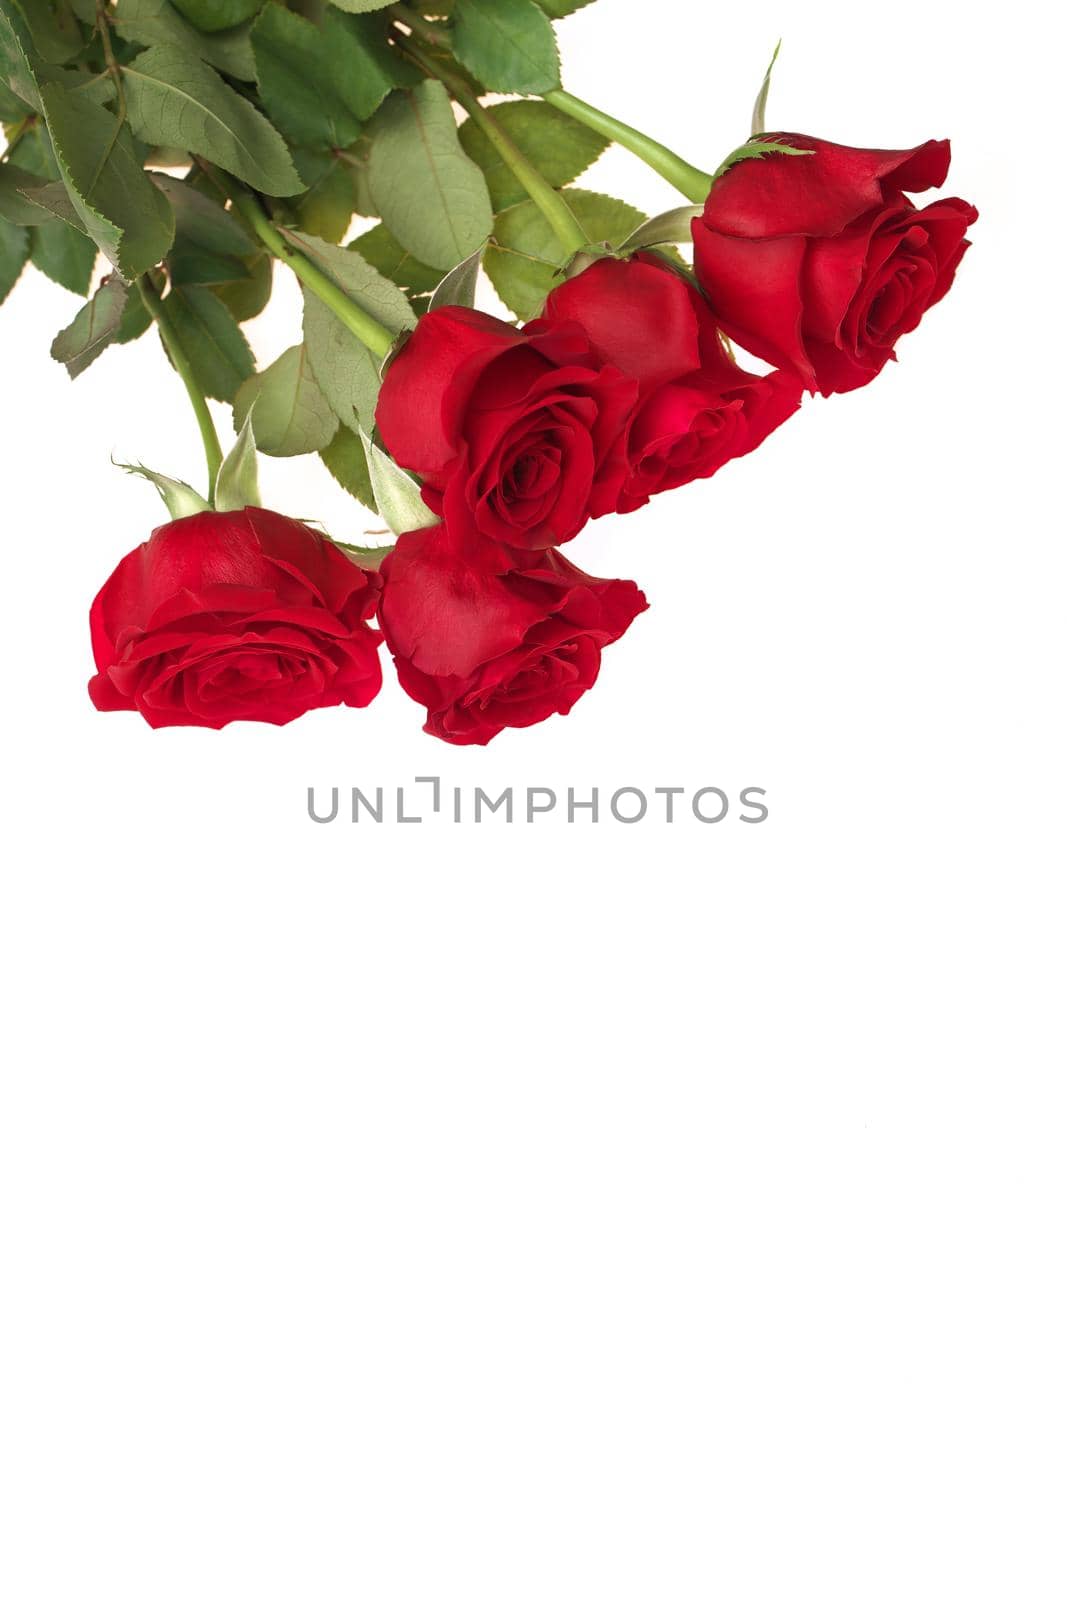 High Angle View of Red Rose Bouquet Isolated on a White Background by markvandam